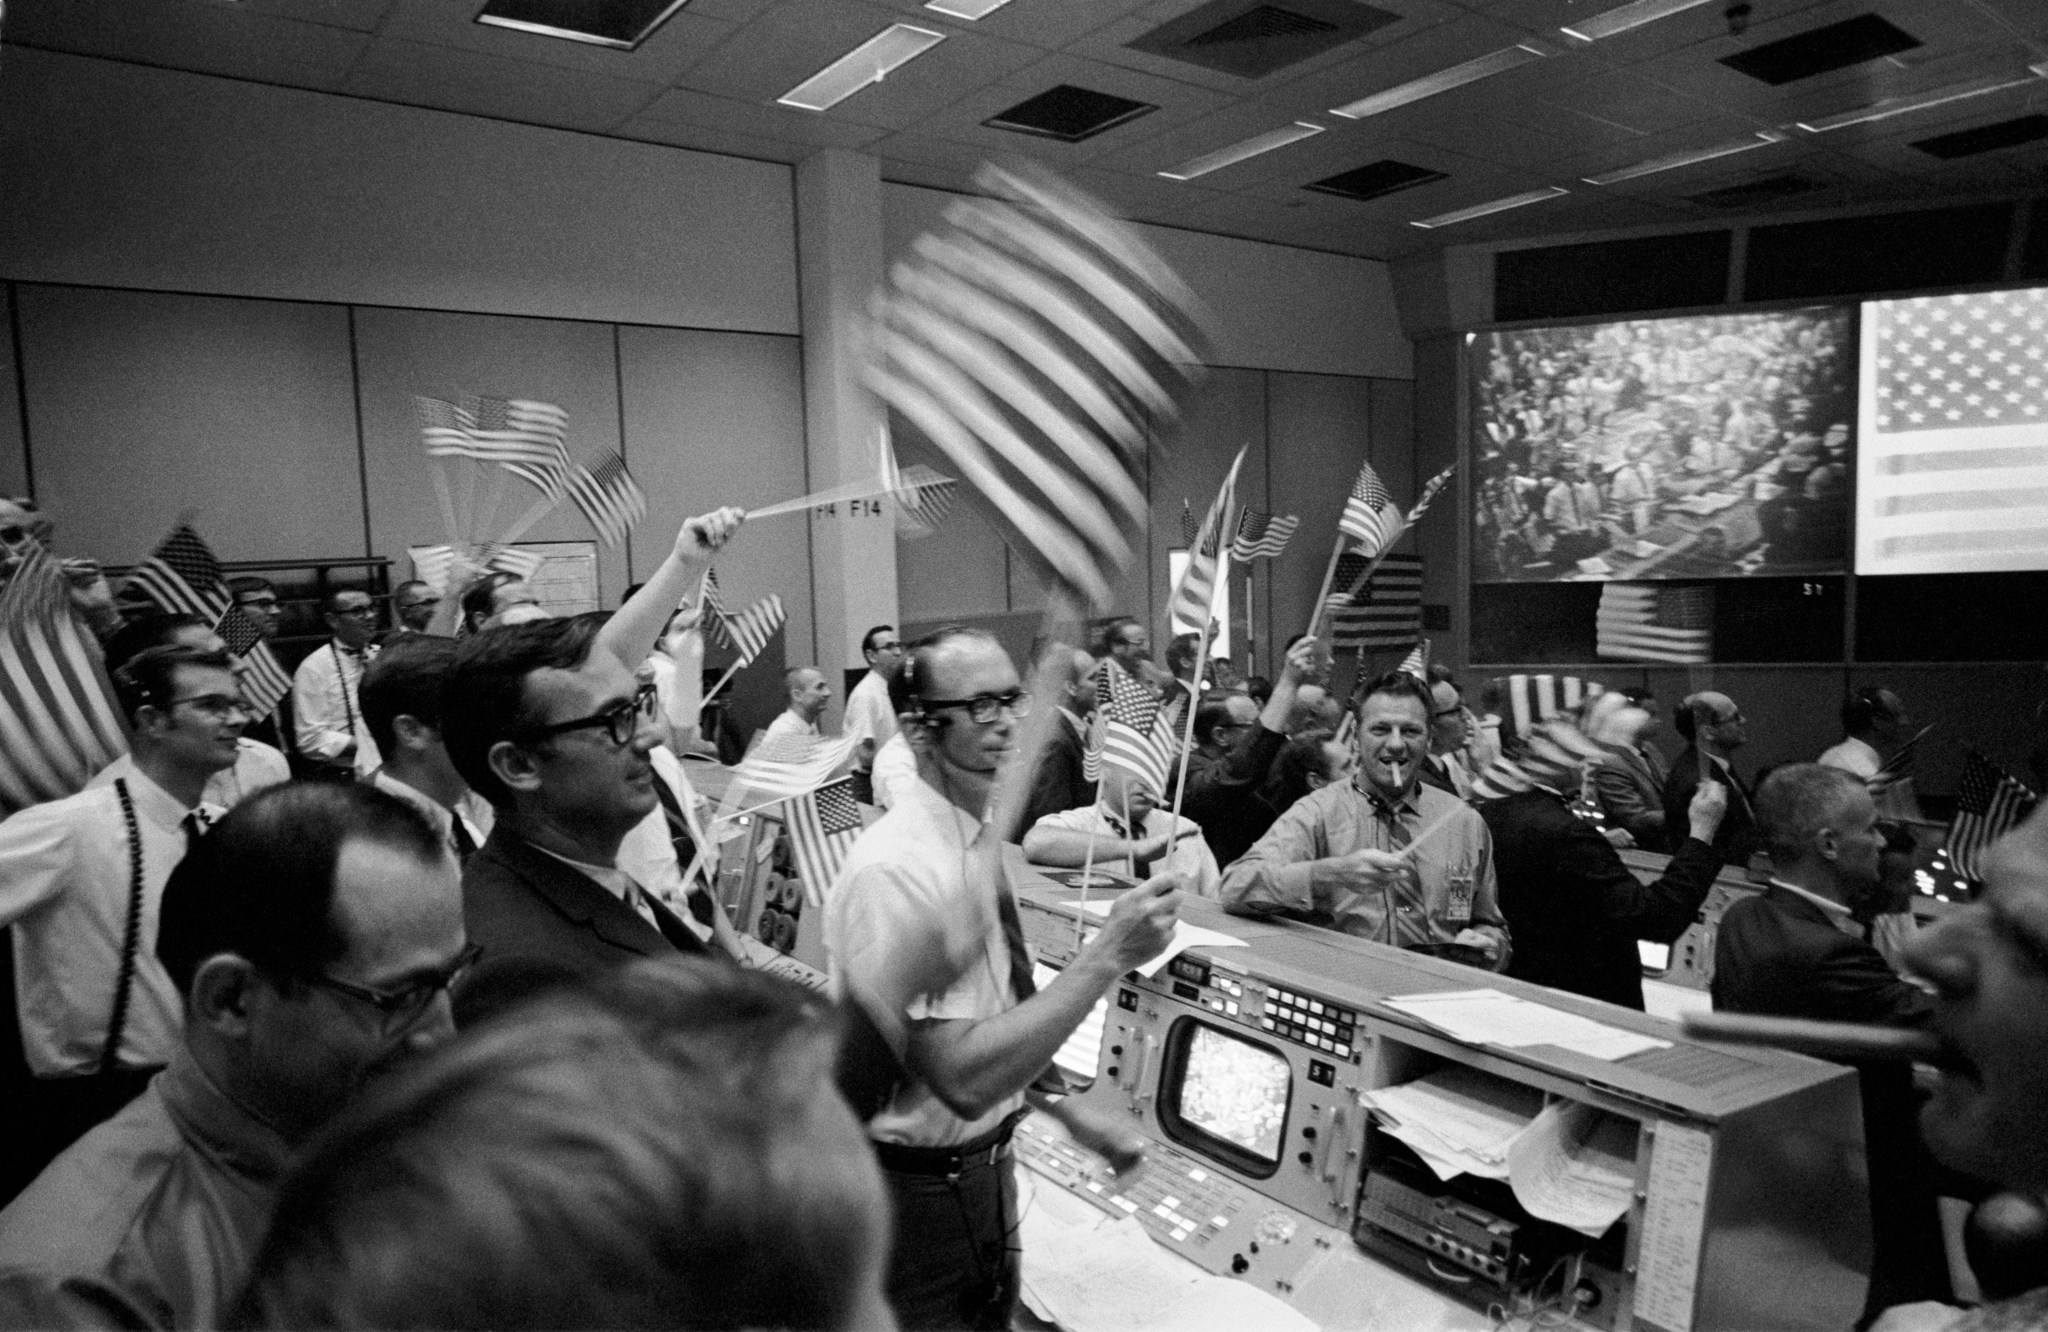 Overall view of the Mission Operations Control Room in the Mission Control Center,  Manned Spacecraft Center showing the flight controllers celebrating the successful conclusion of the Apollo 11 lunar landing mission.